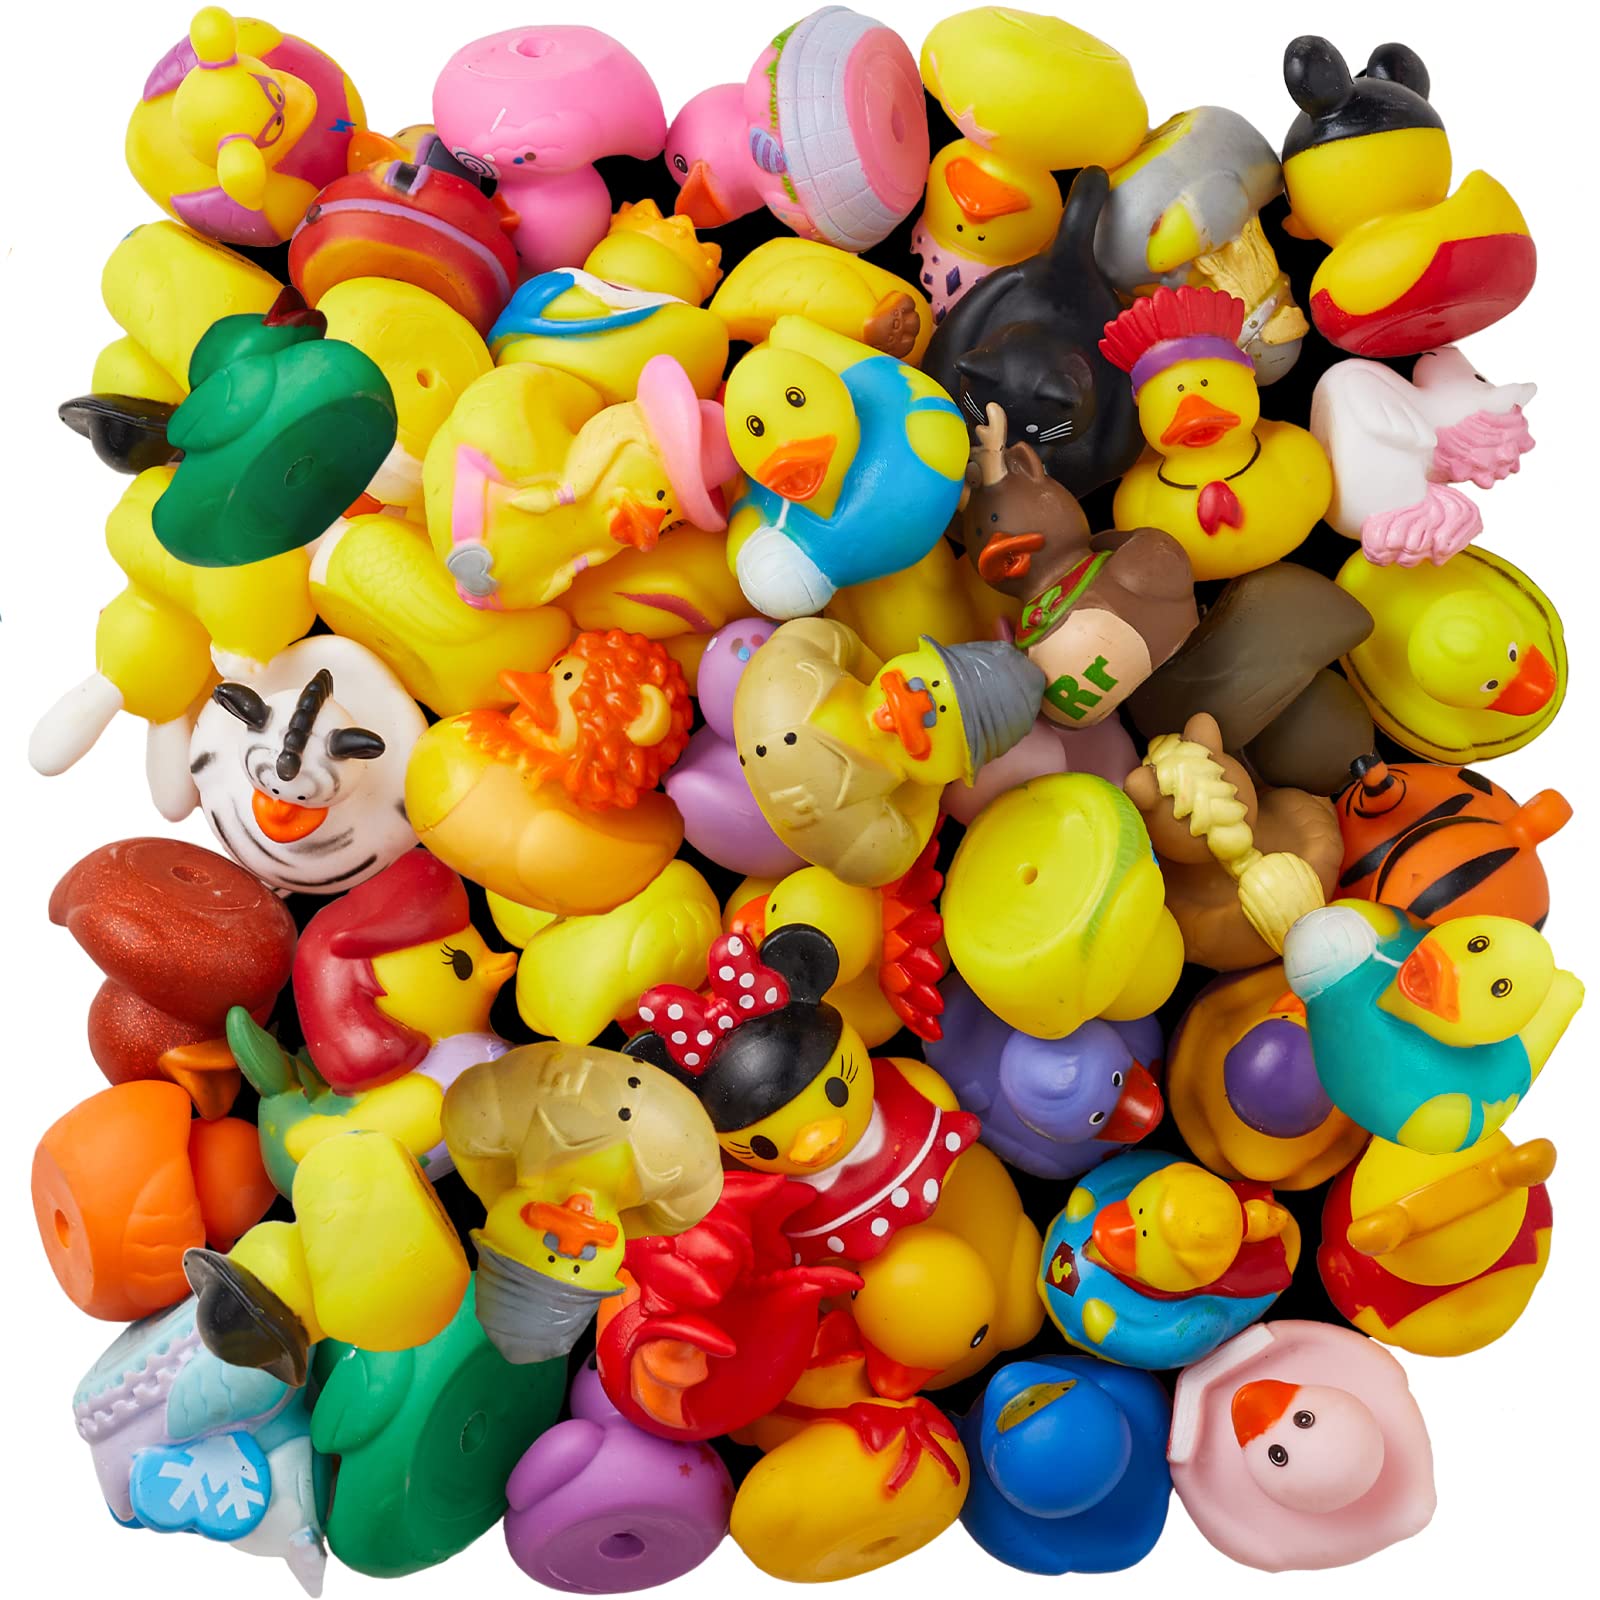 ValenLyra 100 Pack Rubber Duck for Jeeps Ducking - 2